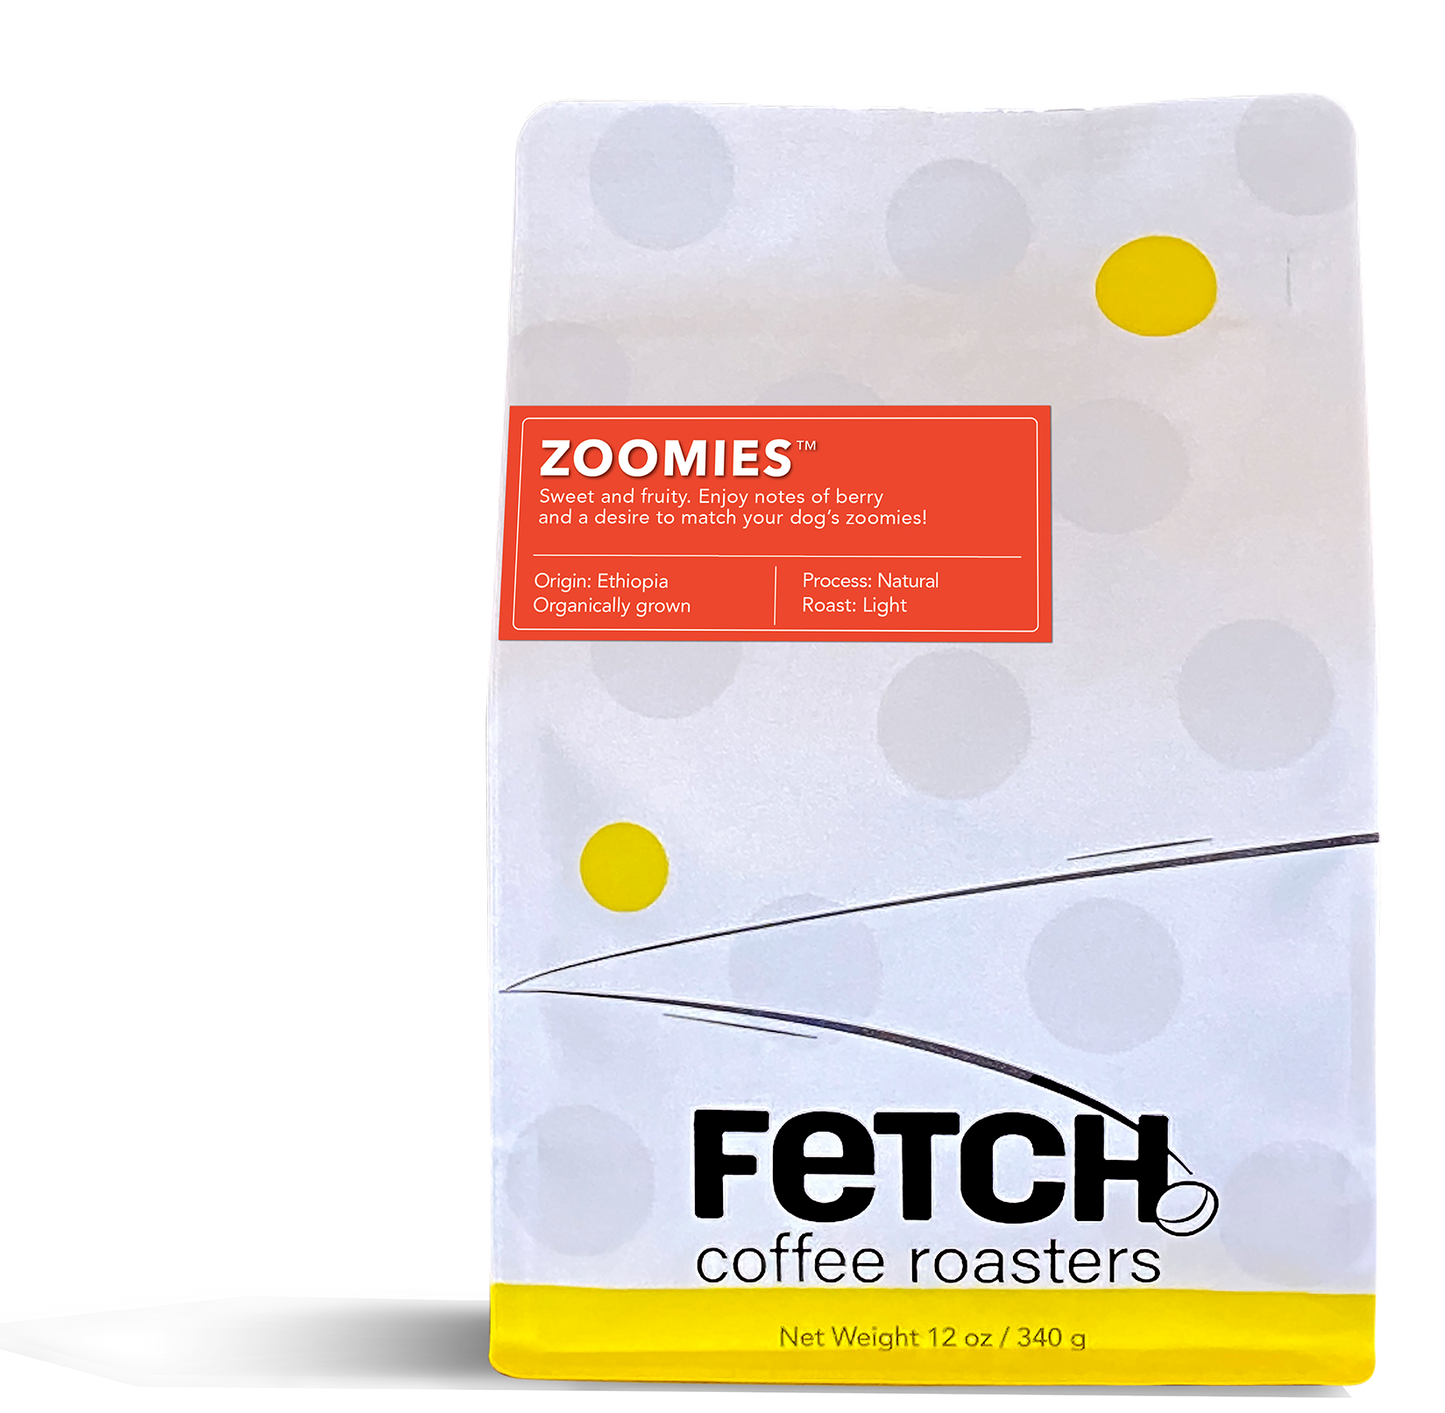 Zoomies has a red-orange label offset to the left and toward the top of the white reclosable coffee bag. The bottom of the bag has a yellow band, and the logo shows a bean sitting at the base of the 'h' of the word Fetch.